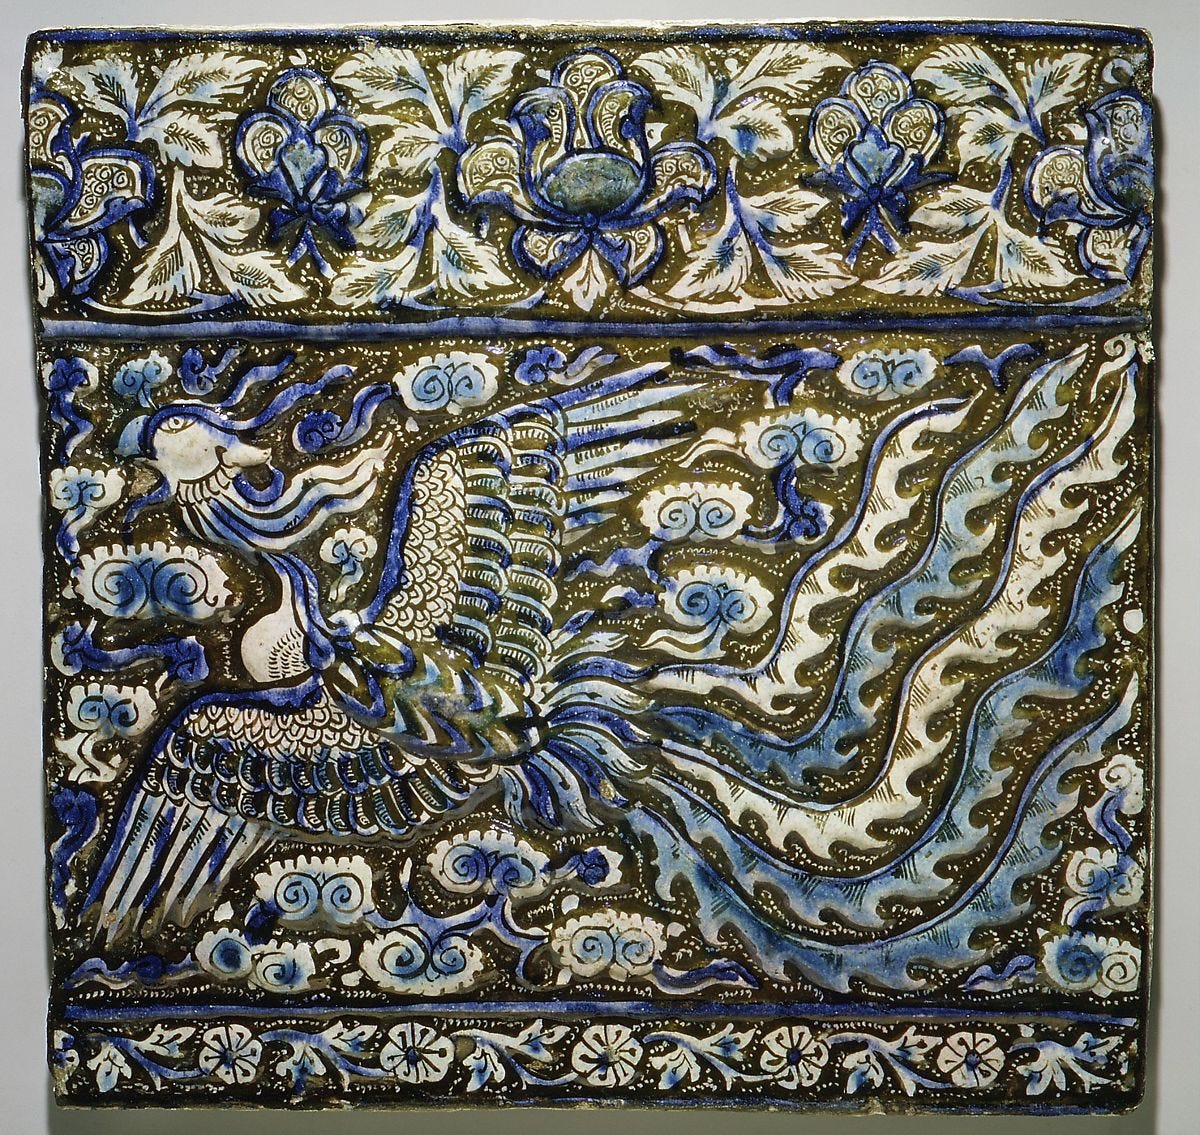 Tile with Image of Phoenix, Stonepaste; modeled, underglaze painted in blue and turquoise, luster-painted on opaque white ground 